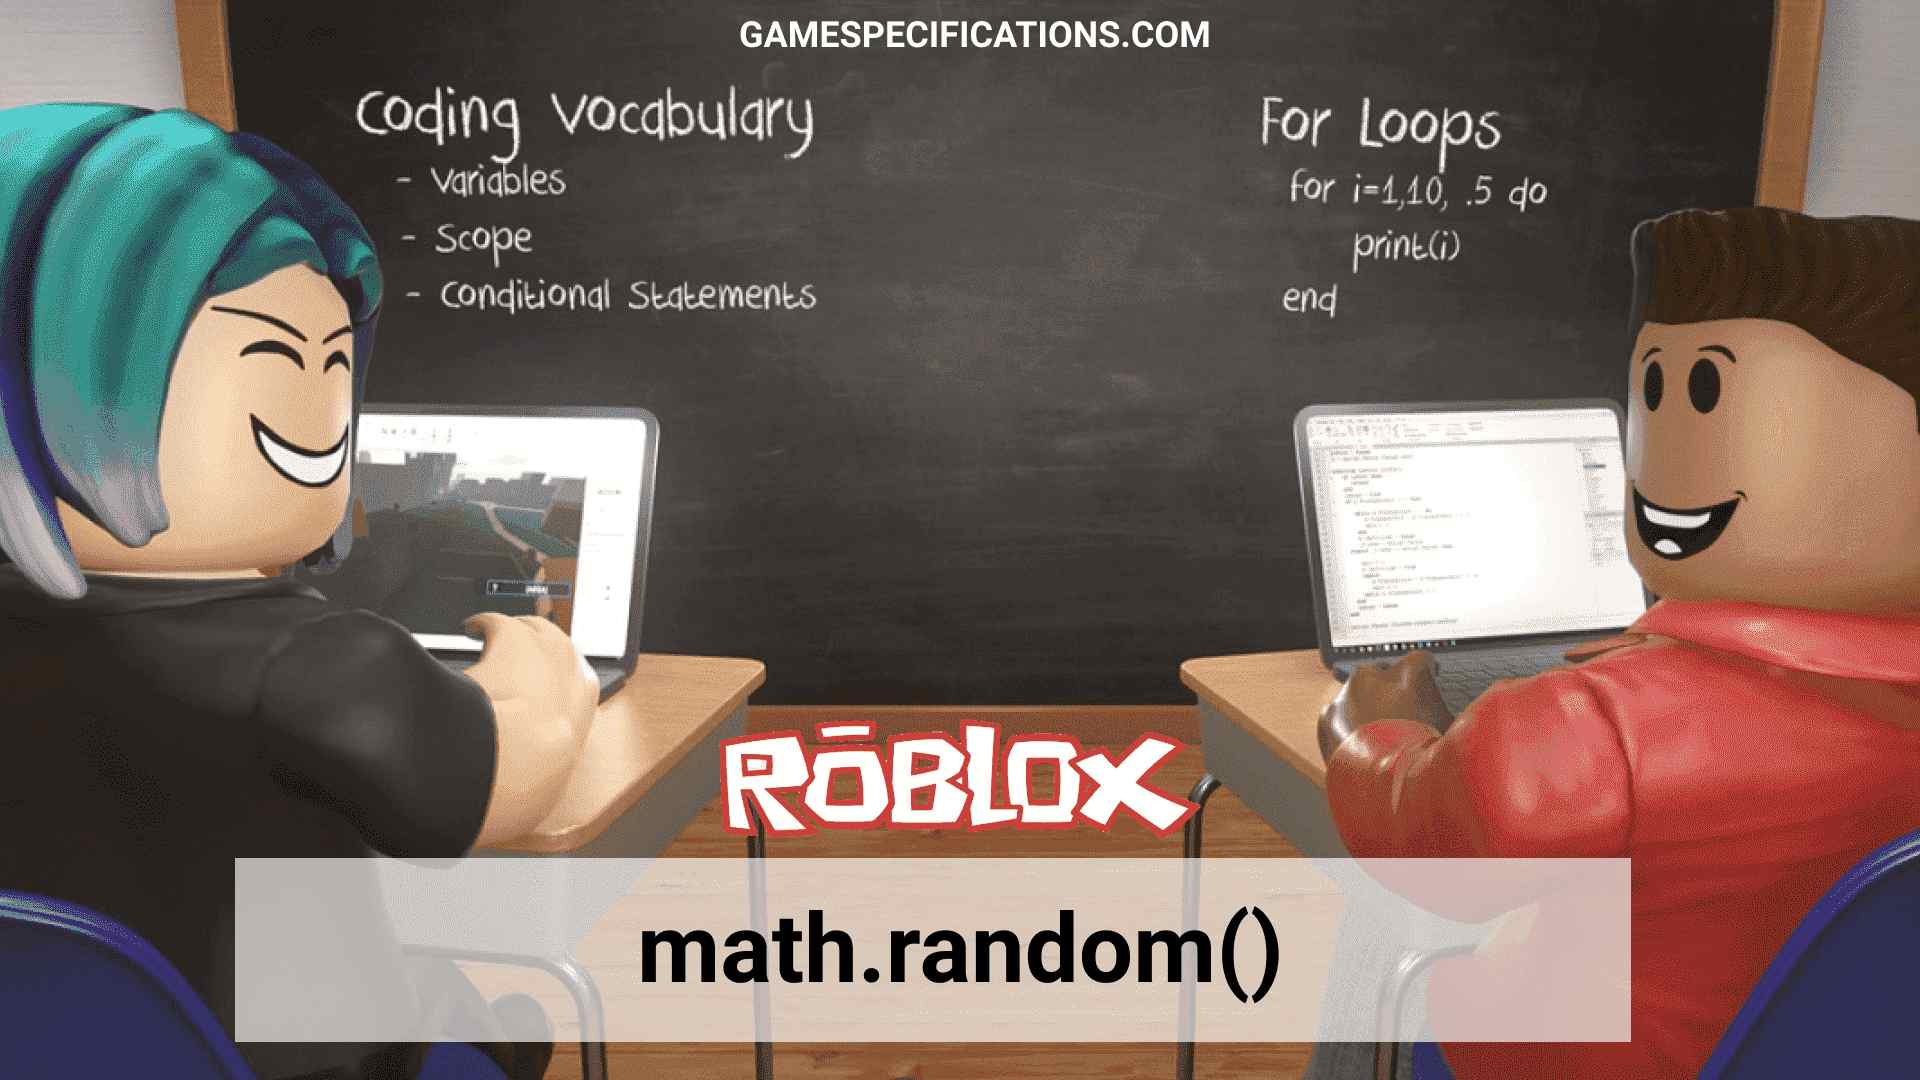 Roblox Math Random How To Use Math Random Efficiently In Roblox Game Specifications - roblox random letter generator